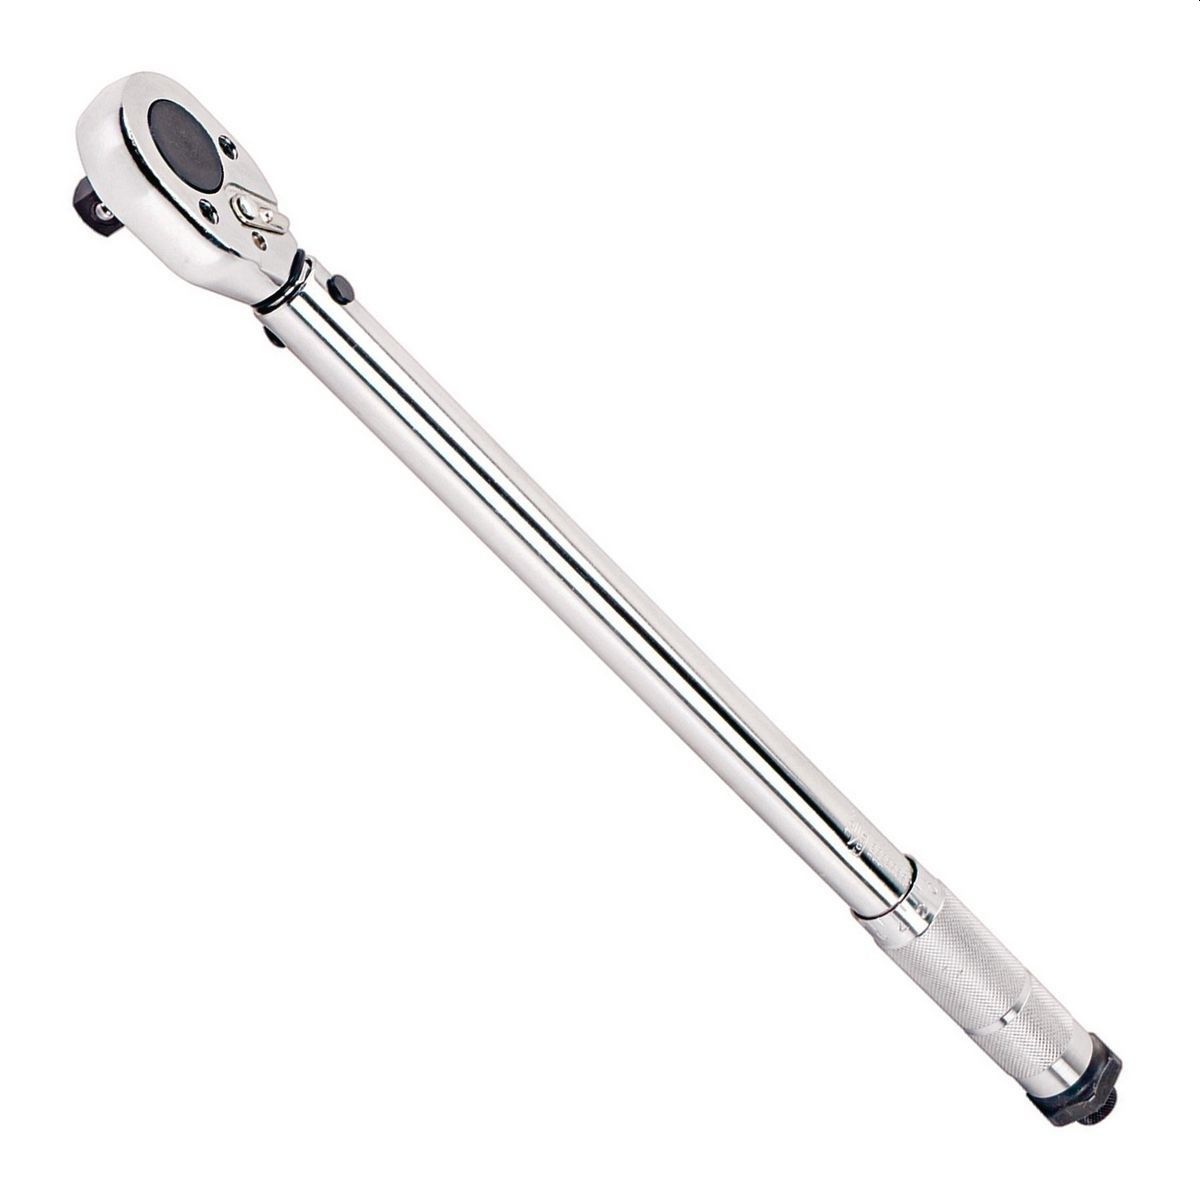 Pittsburgh Torque Wrenches 20% Off ($16) Harbor Freight